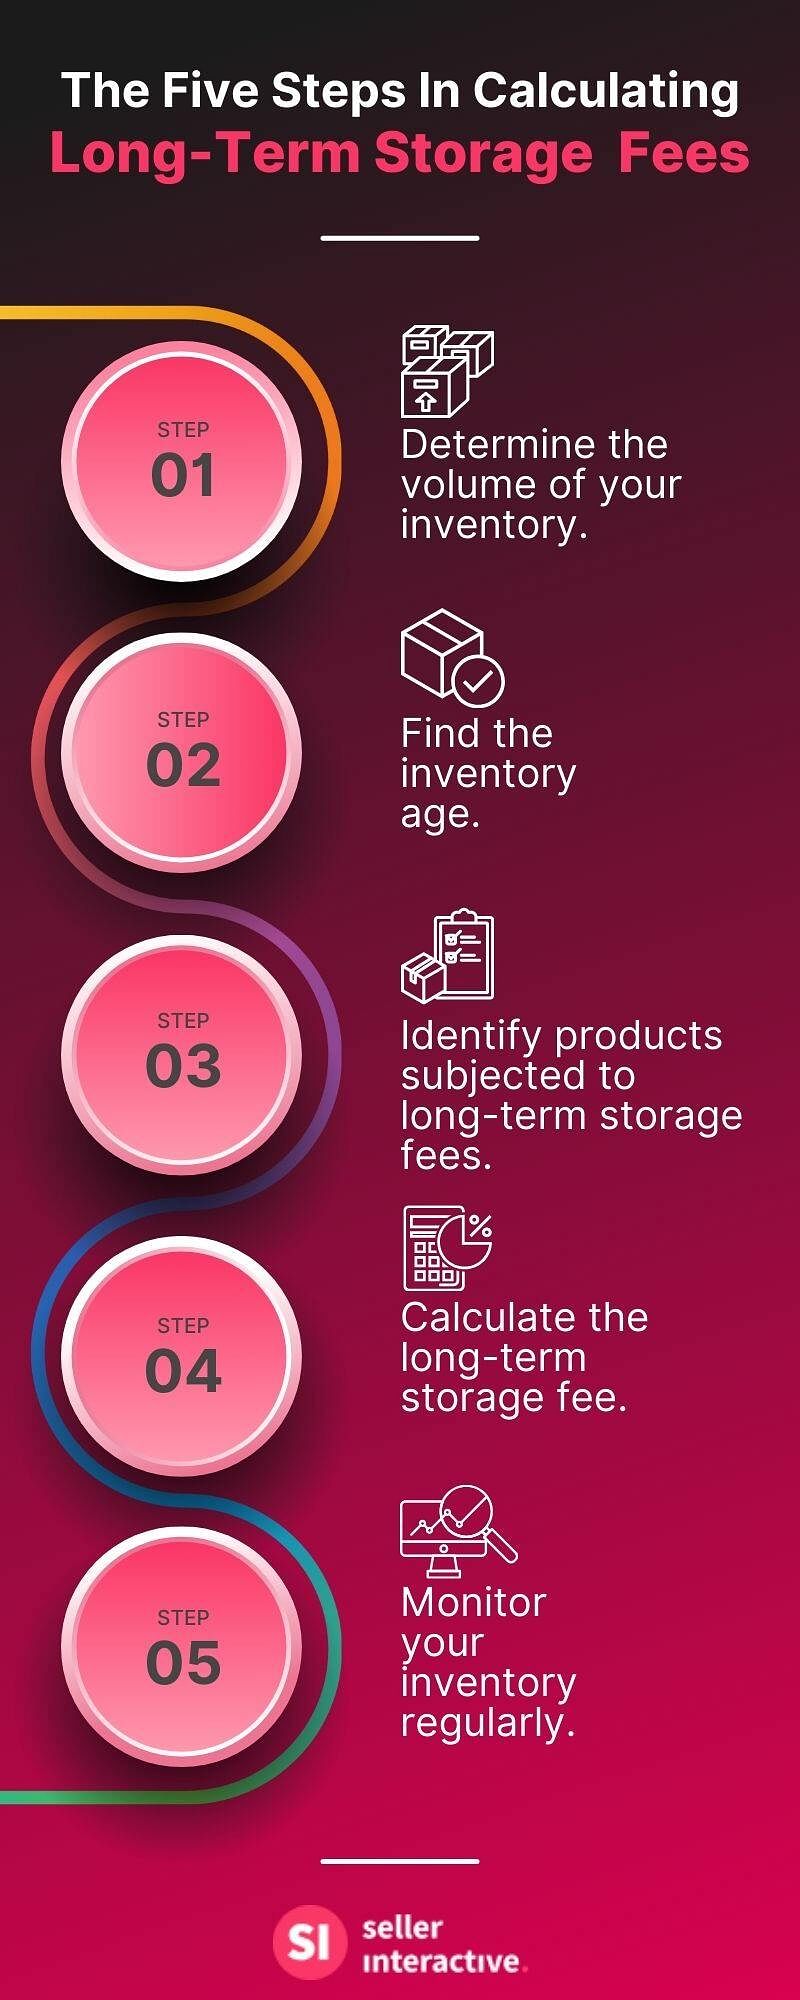 The fives steps in calculating long-term storage fees